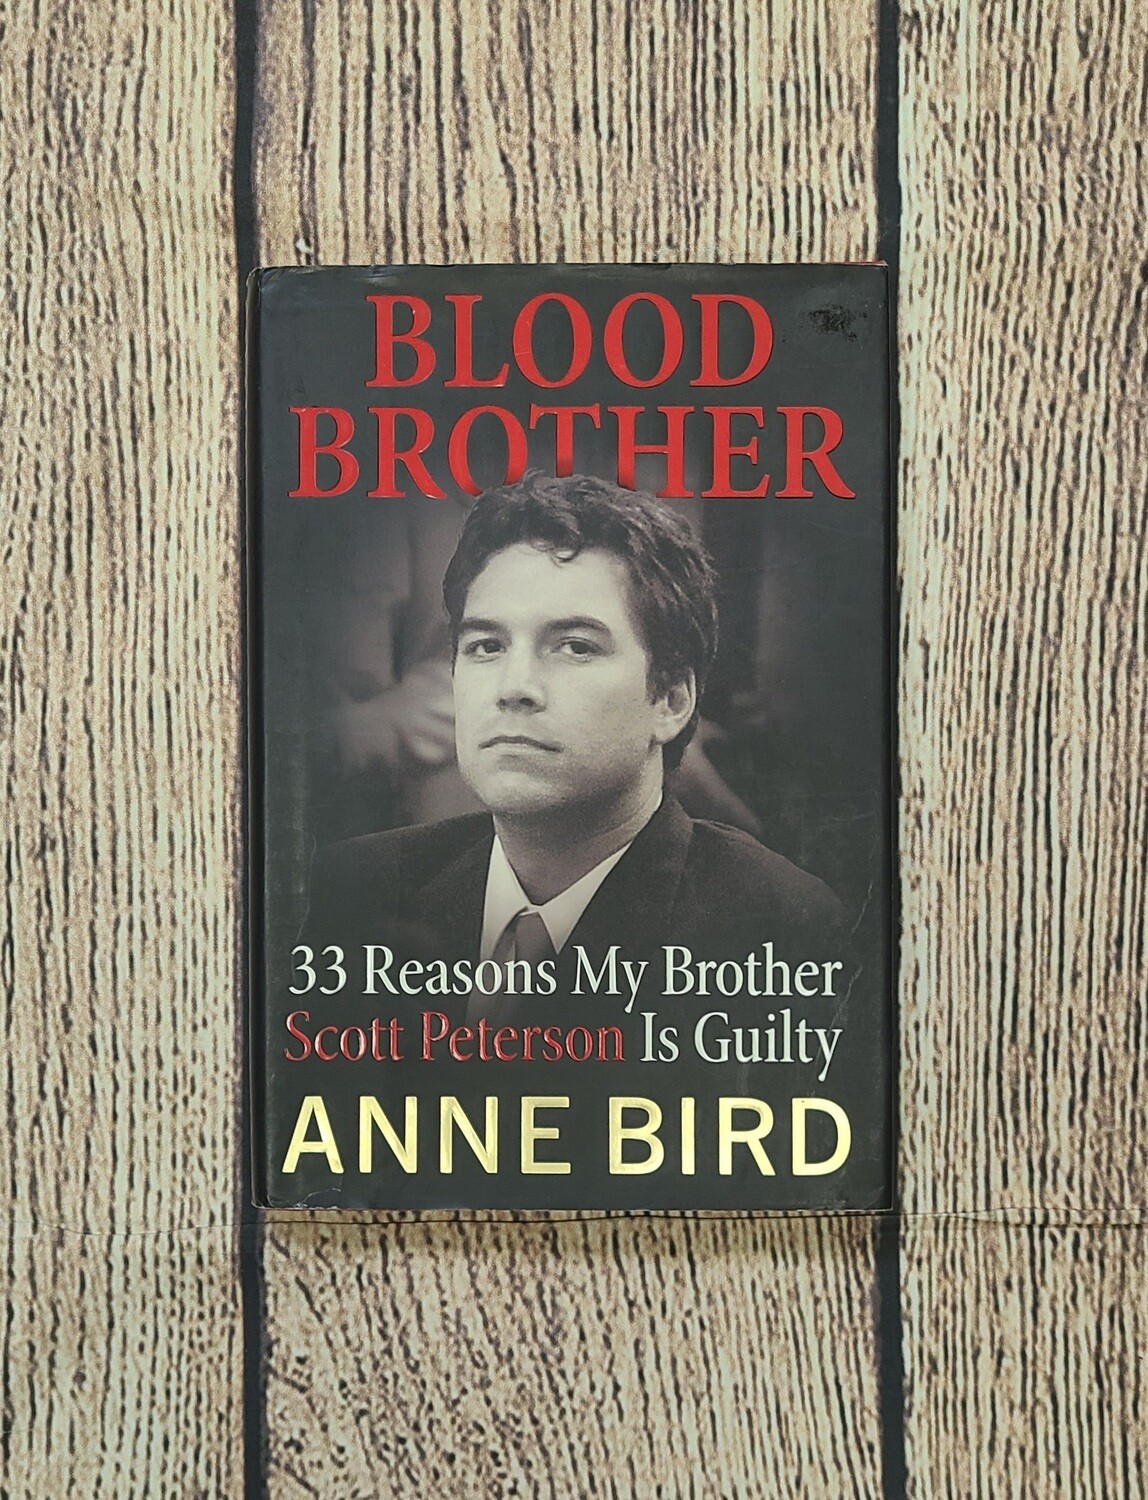 Blood Brother: 33 Reasons My Brother Scott Peterson is Guilty by Anne Bird